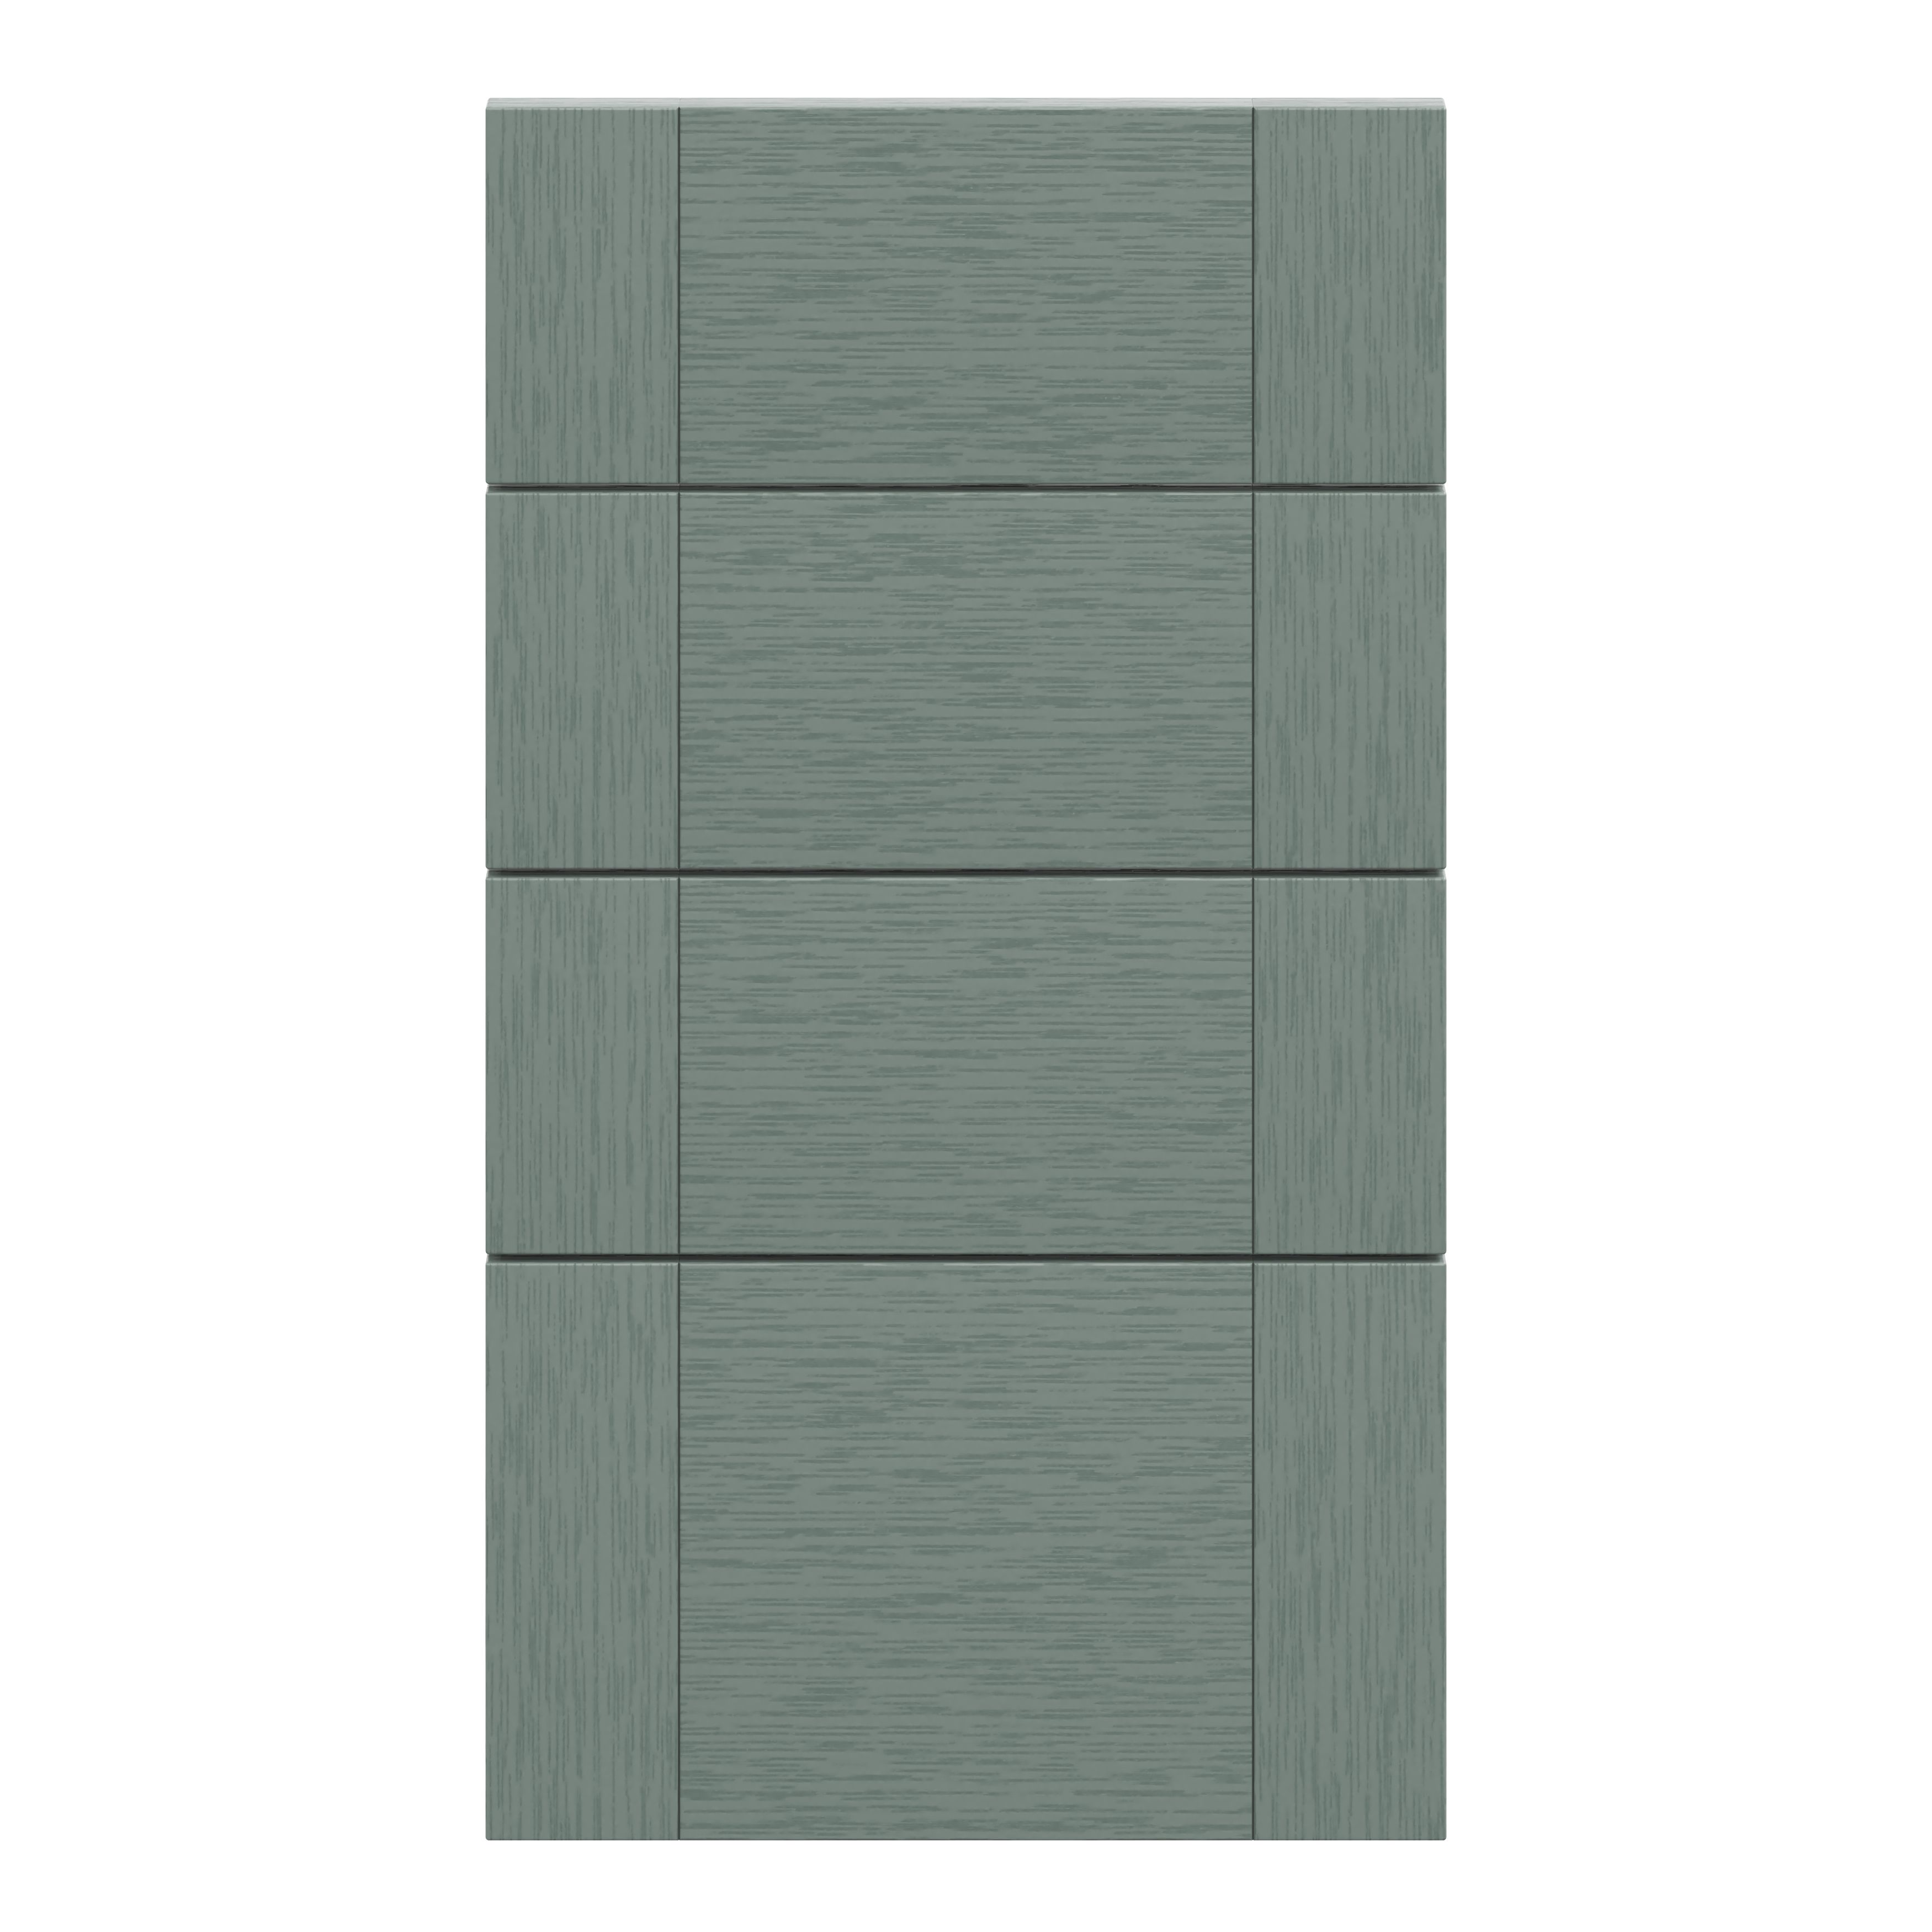 GoodHome Matt Green Painted Wood Effect Shaker Drawer front (W)400mm, Pack of 4